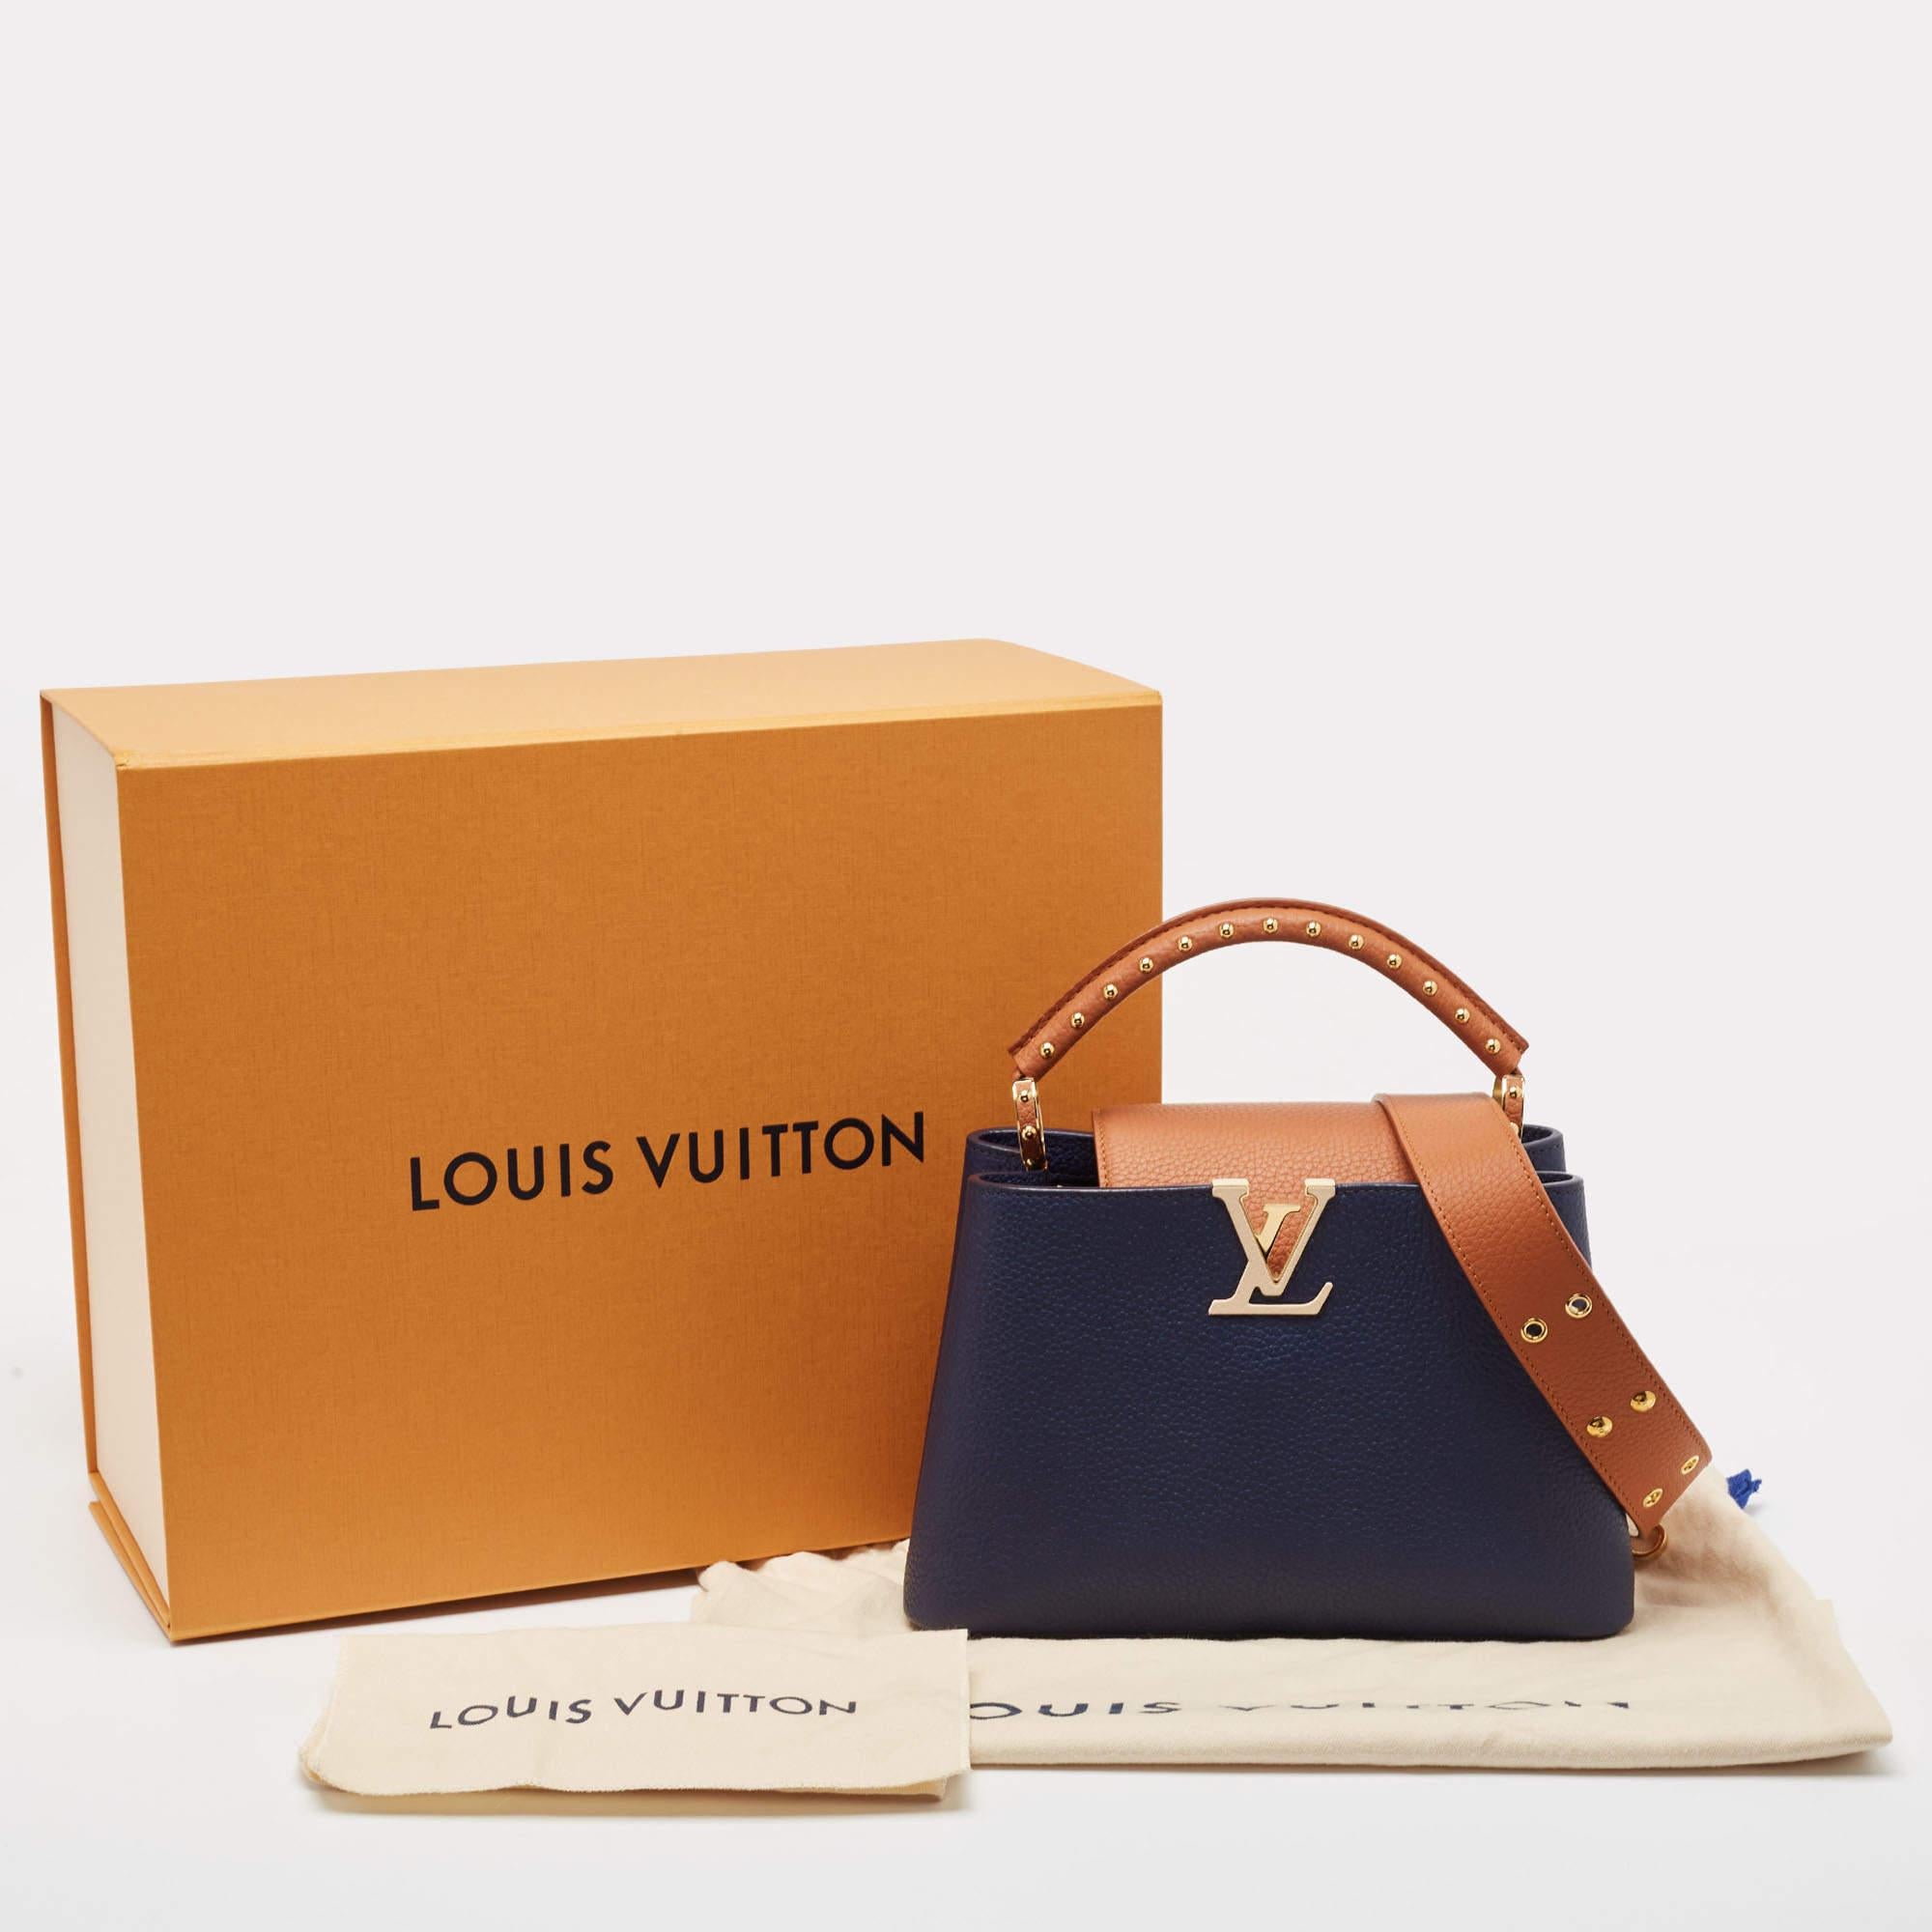 Louis Vuitton Navy Blue/Brown Leather Studded Capucines BB Bag 3